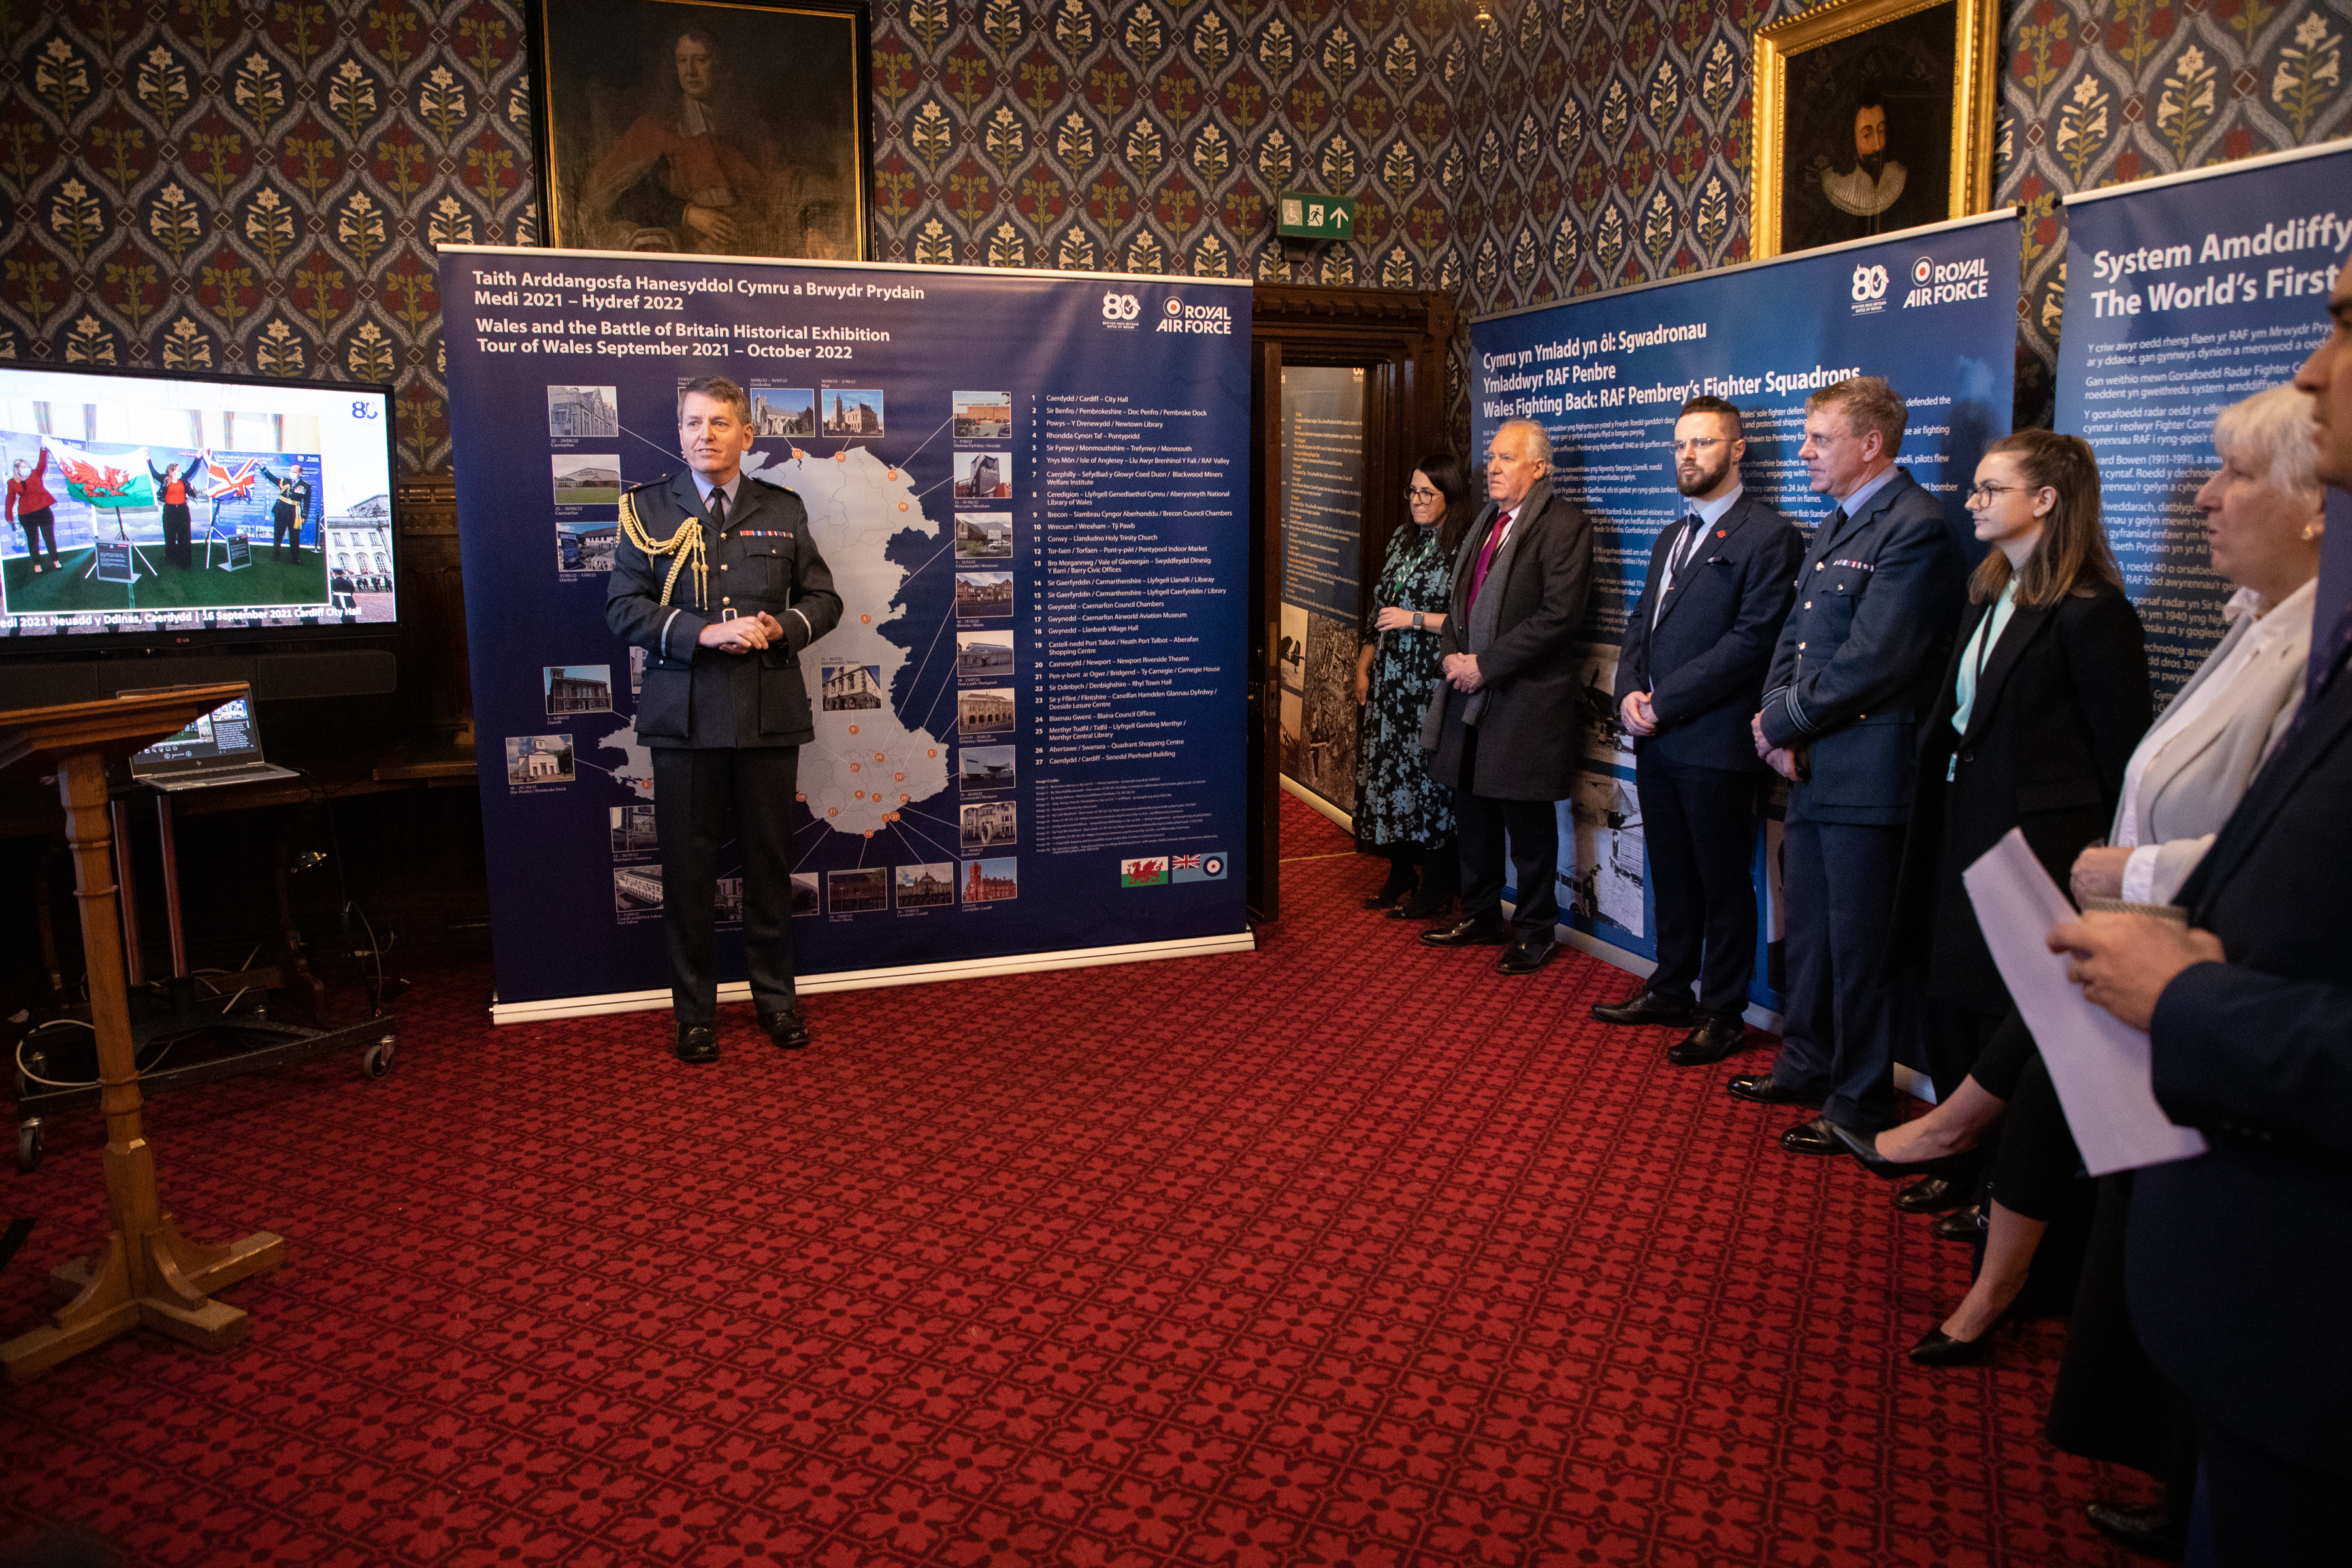 Image shows RAF aviator and civilians watching presentation at exhibition.